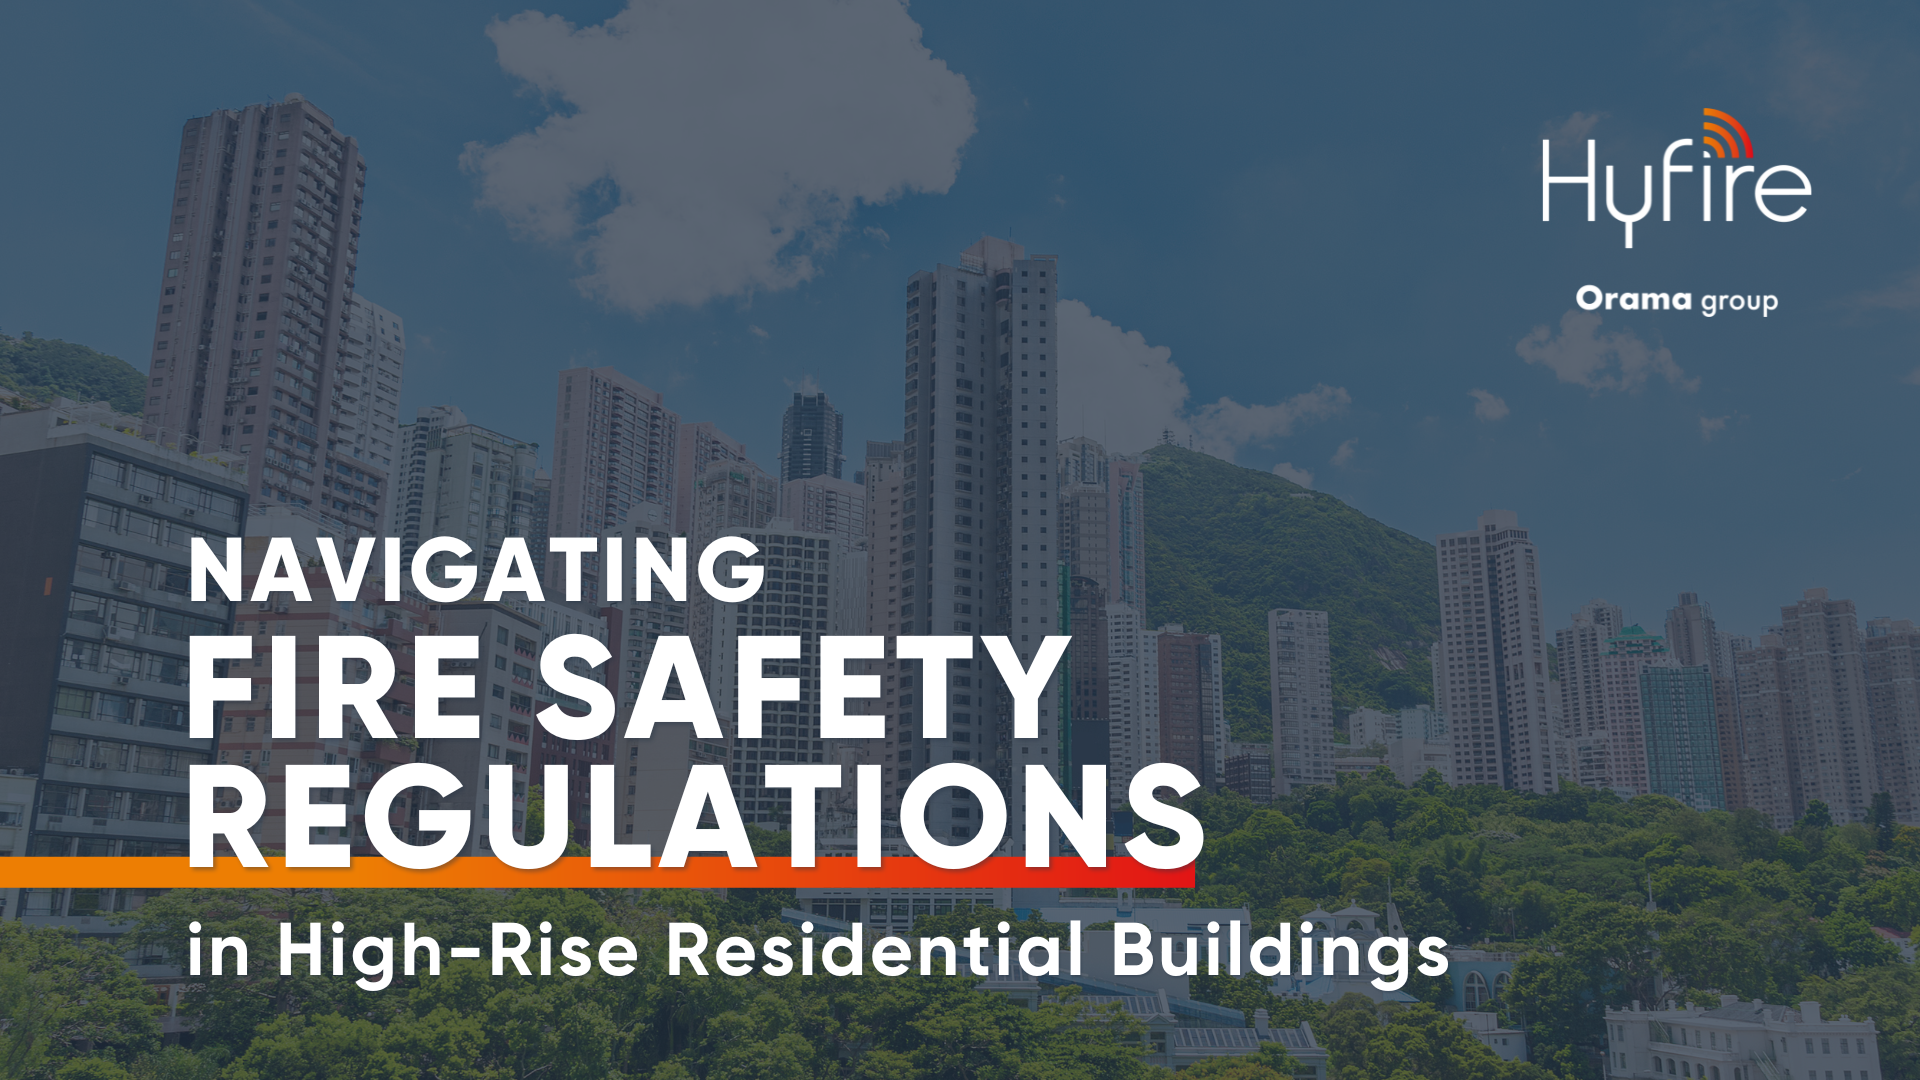 Fire Safety Regulations in High-Rise Residential Buildings